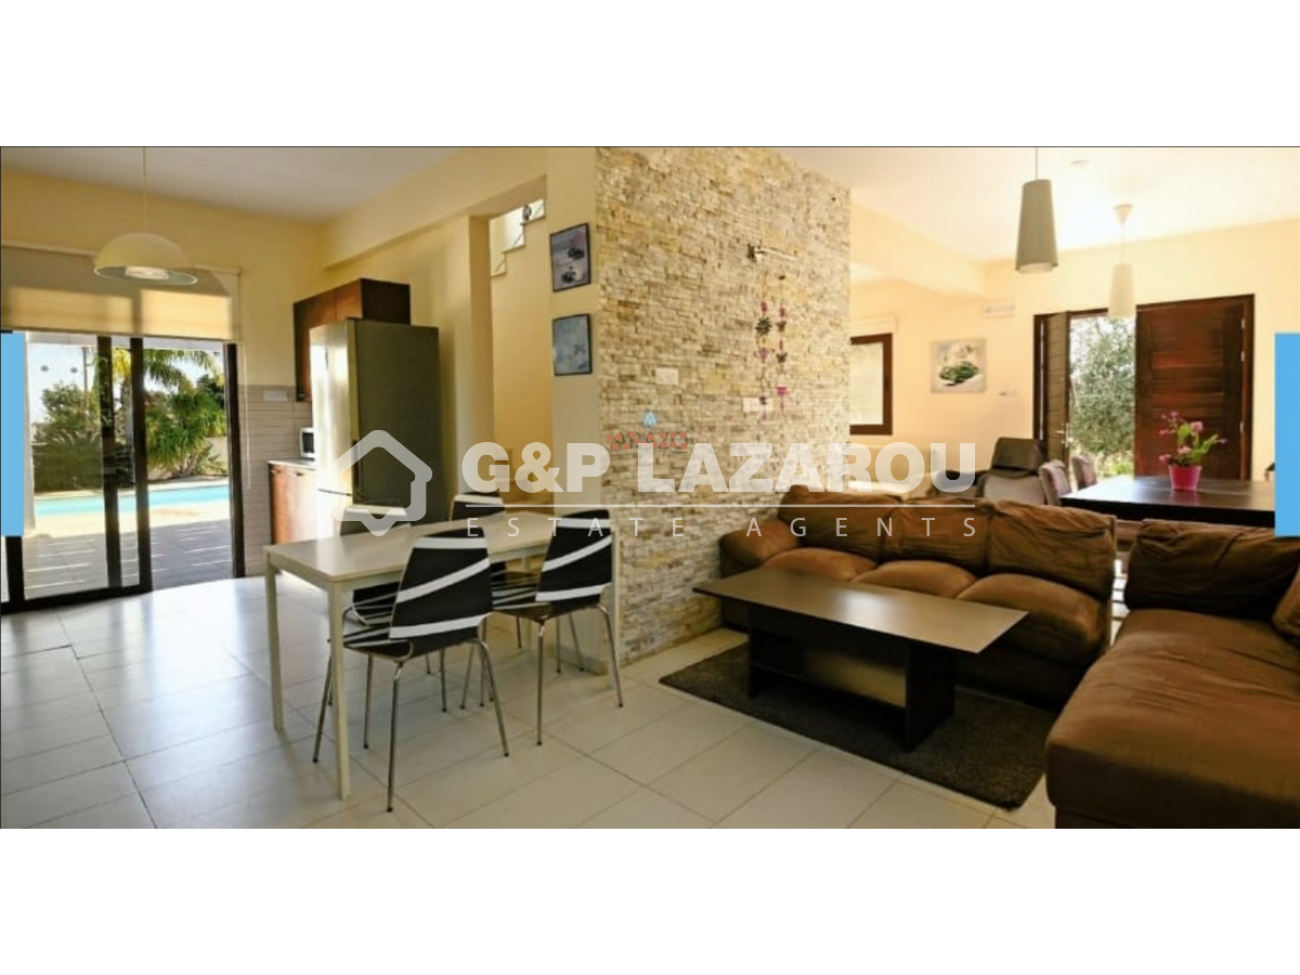 5 Bedroom House for Rent in Protaras, Famagusta District